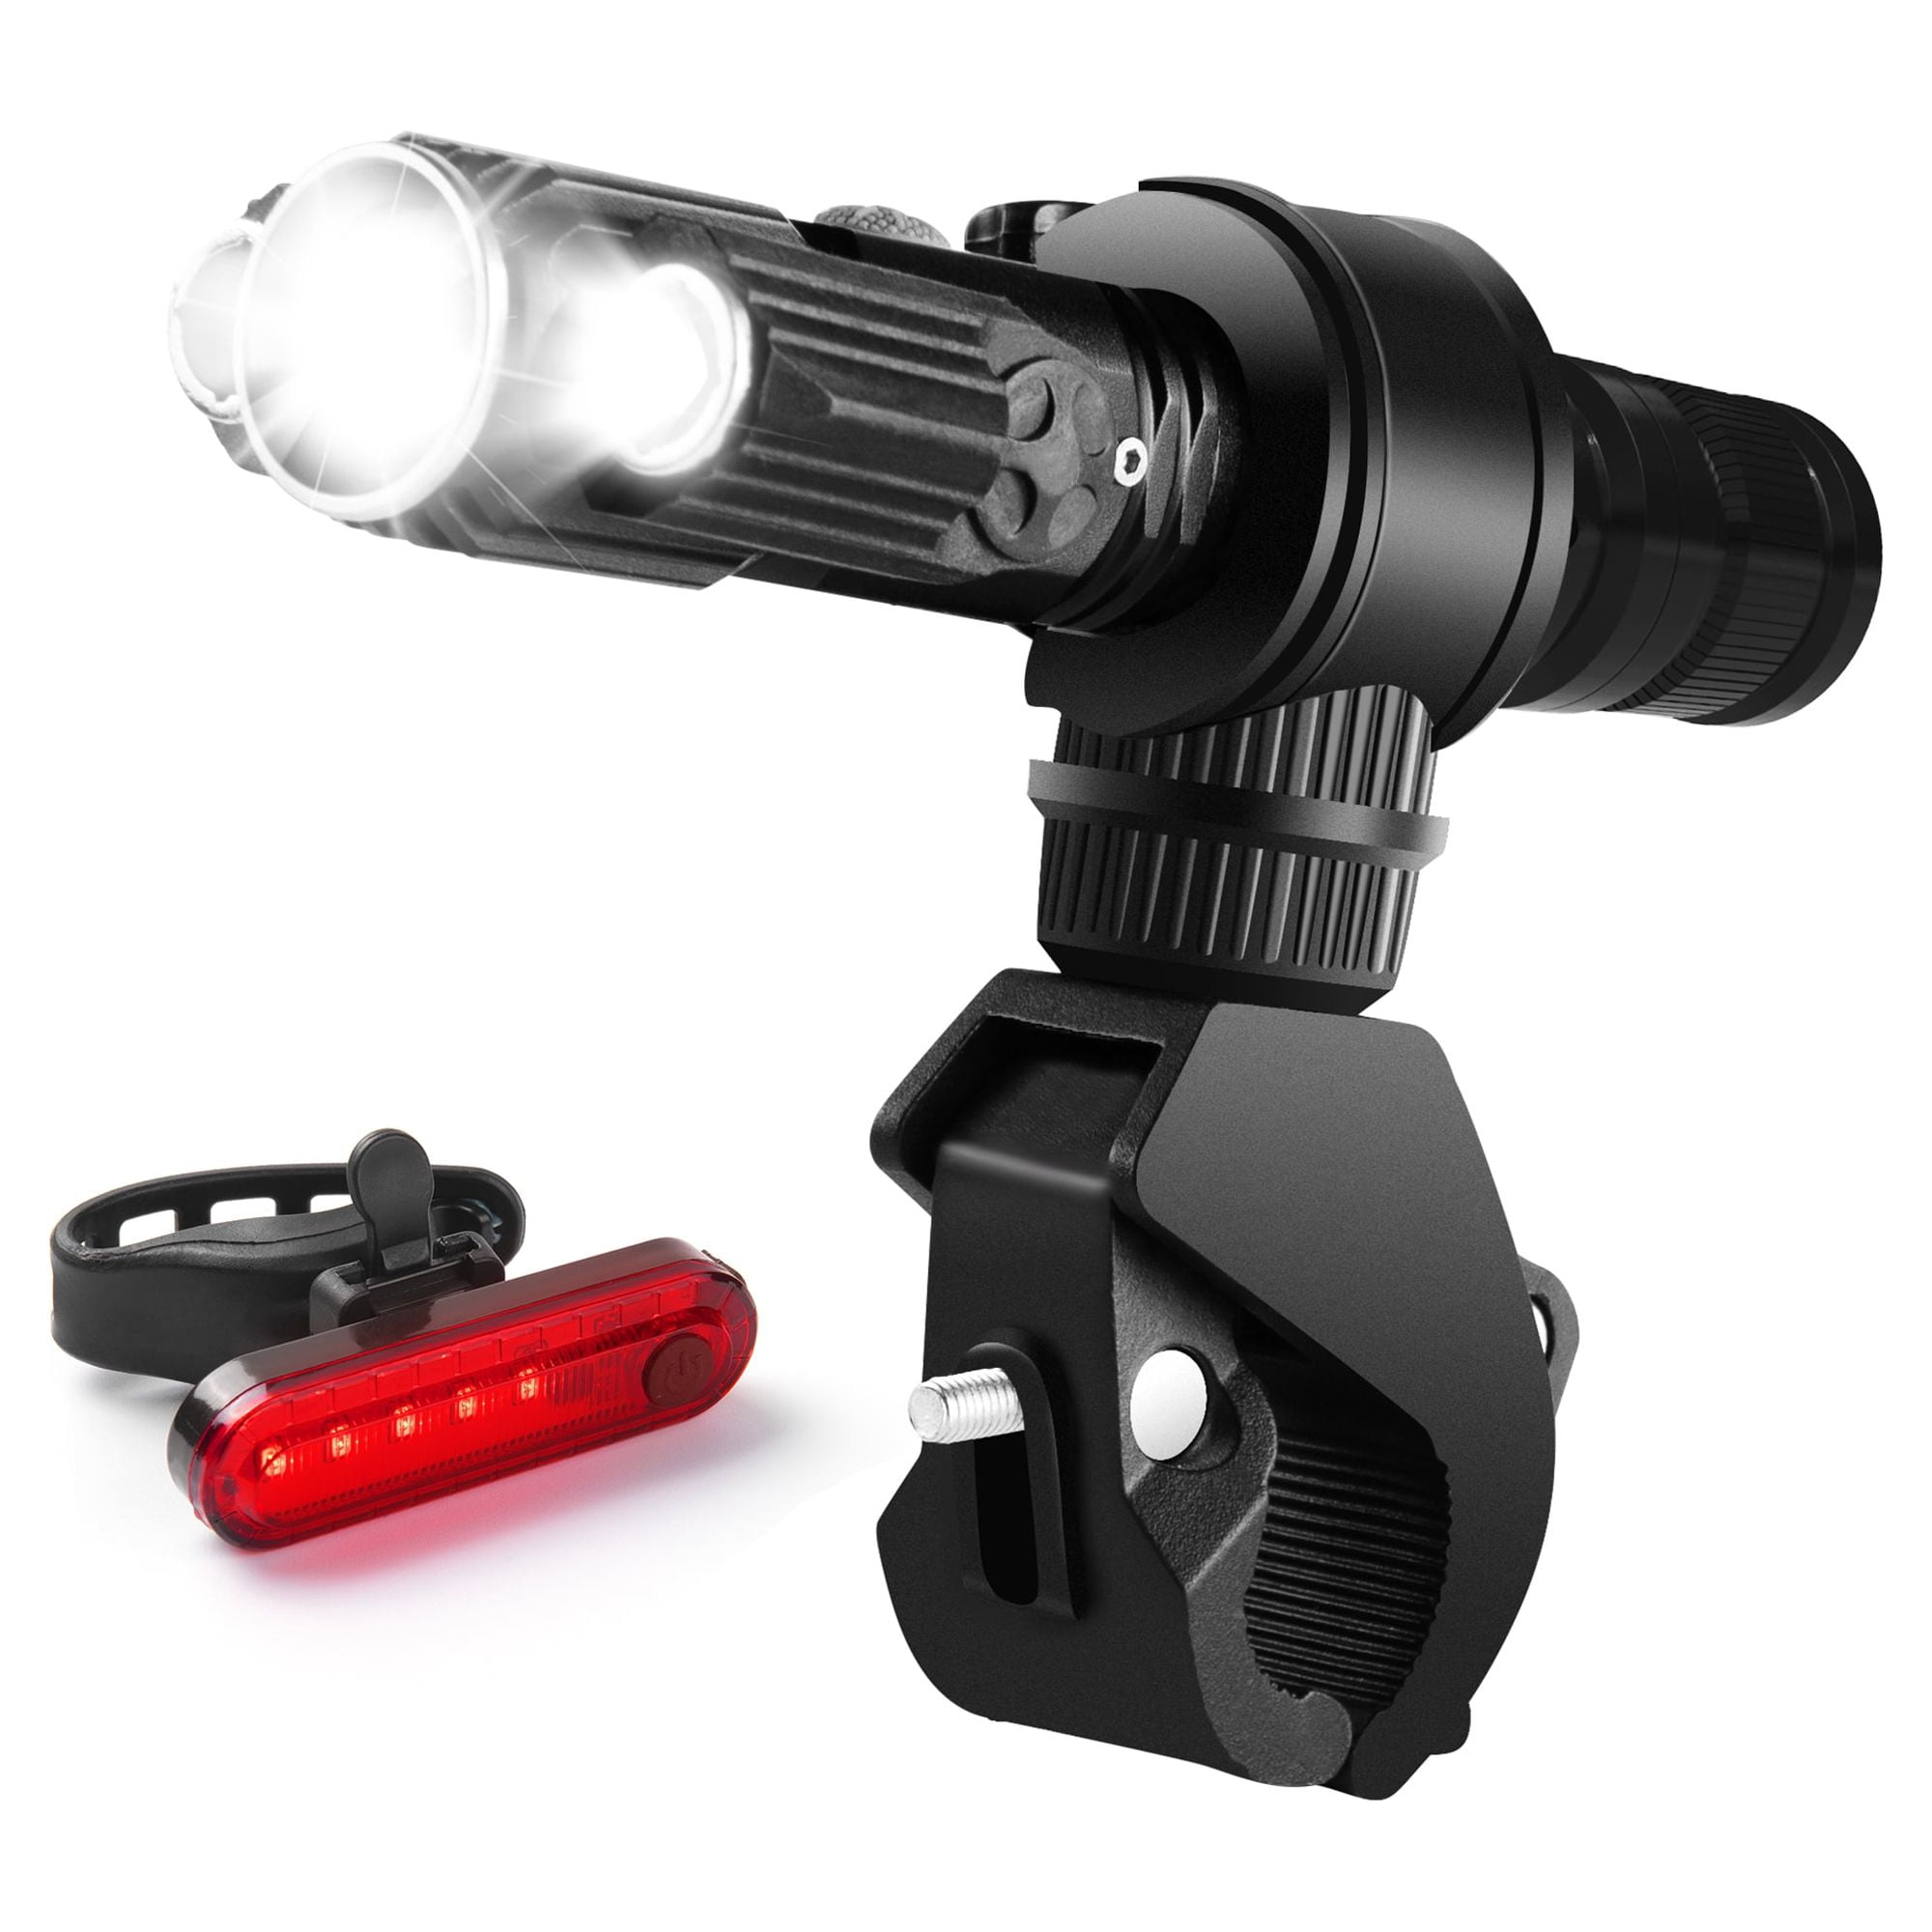 BV Bike Lights, Super Bright with 5 LED Bike Headlight & 3 LED Rear, Bike  Lights for Night Riding with Quick-Release, Waterproof Bicycle Light Set